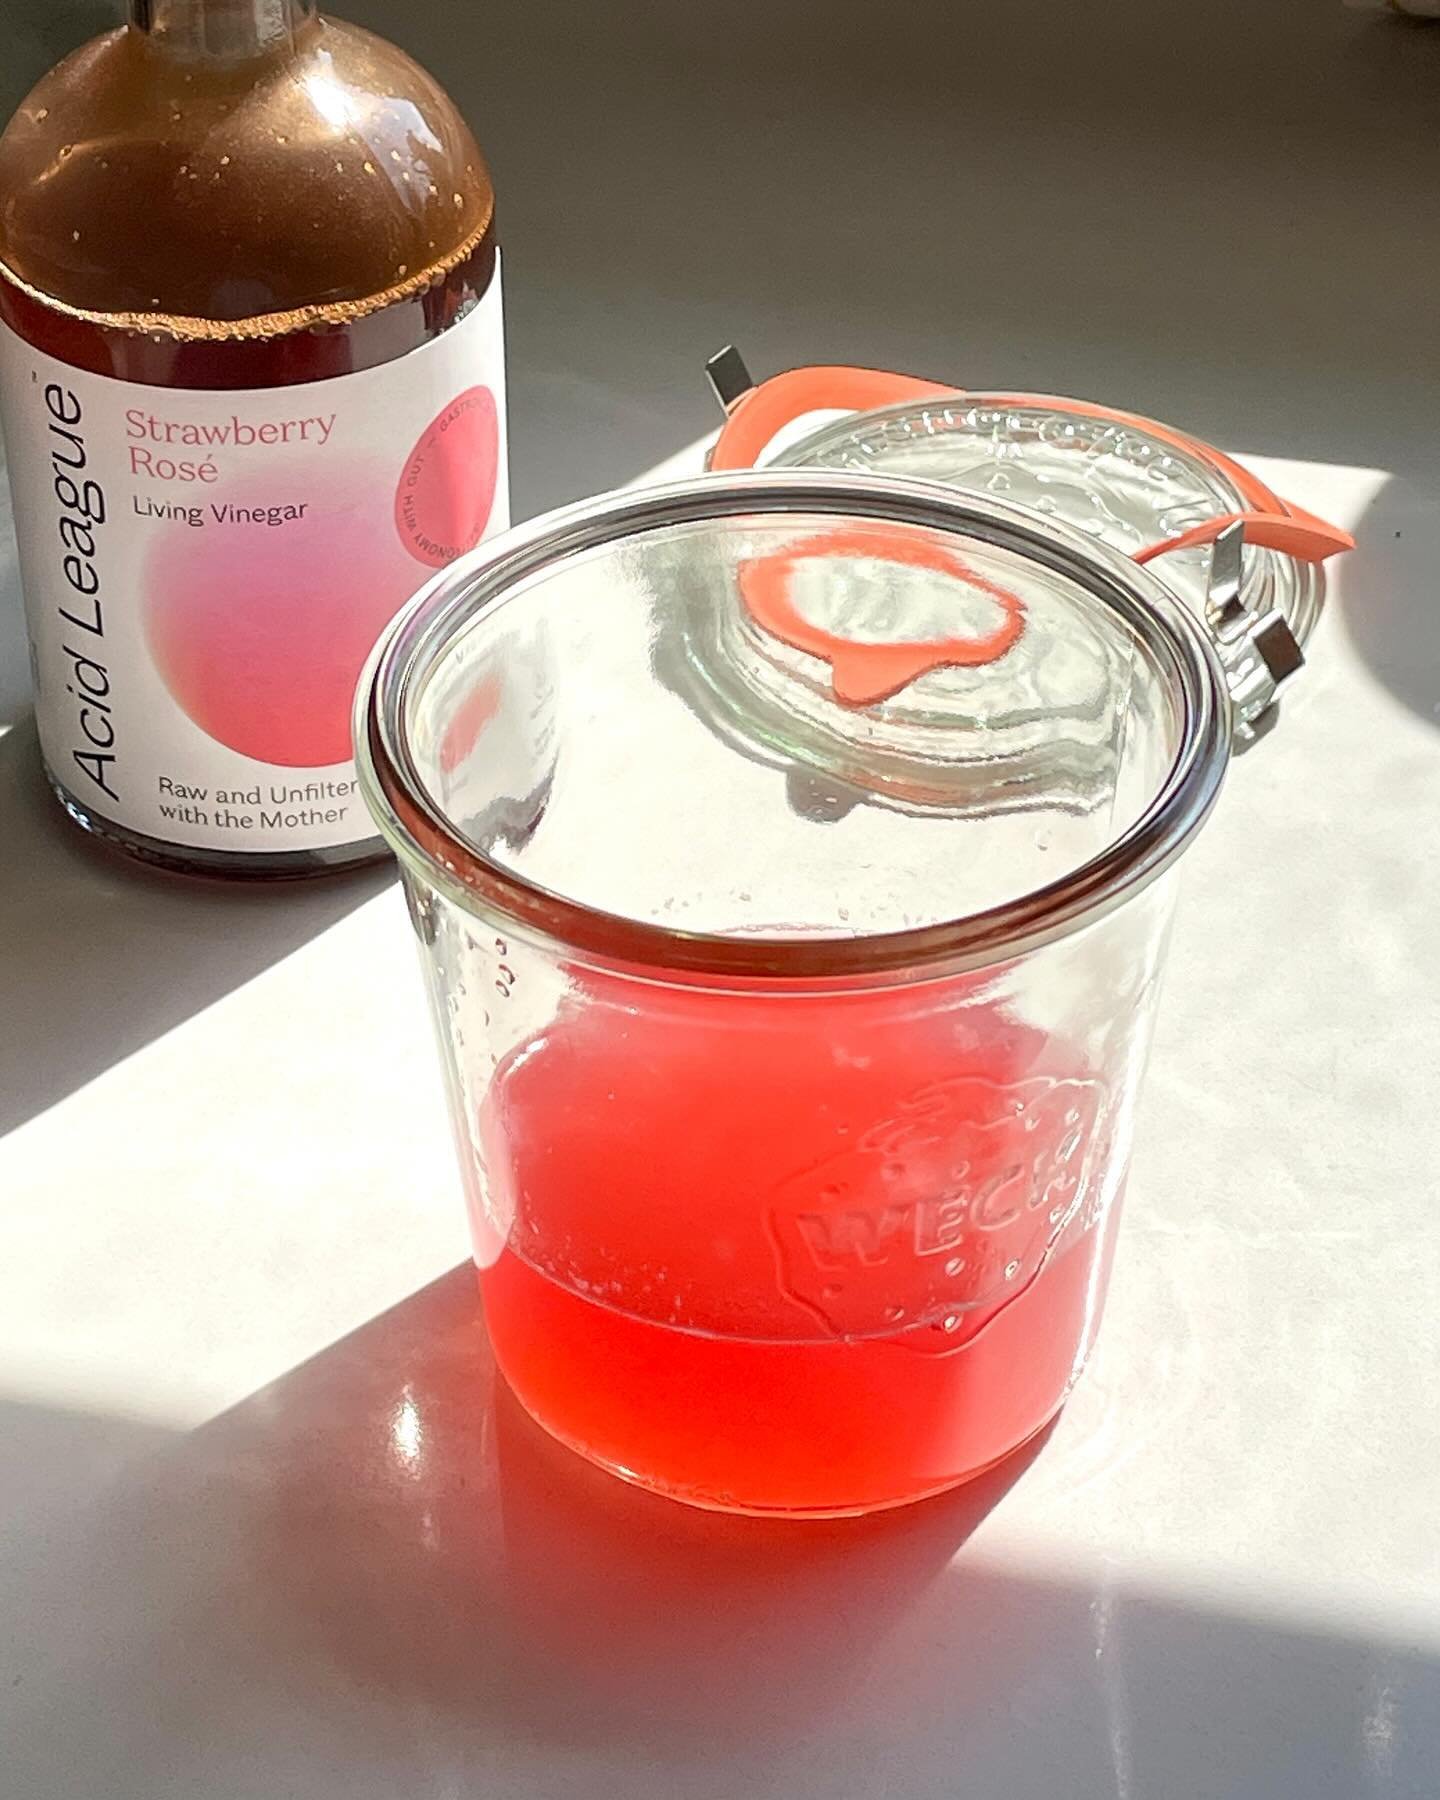 Officially rhubarb girl summer✨

We received a whole whack of rhubarb this weekend, so we started off the season by making a vibrant pink rhubarb simple syrup for a refreshing non-alc spritz to ring in the warm weather💅🏼

Kept the spritz simple by 